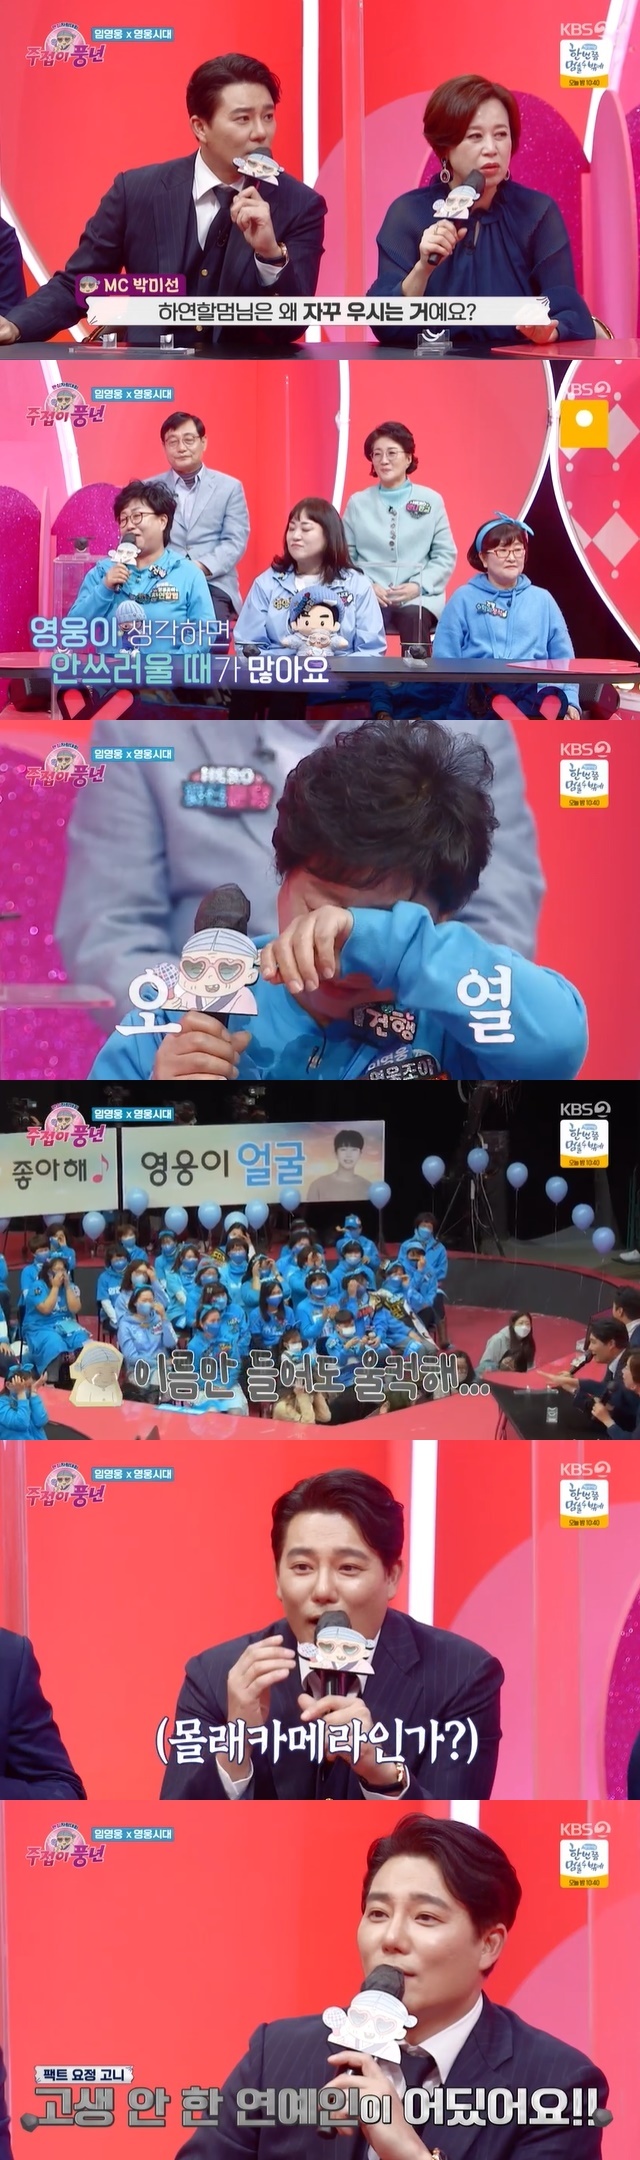 Lee Tae-gon hits a single in a tearful fan as Lim Young-woong is sorryIn the second episode of KBS 2TV entertainment Fan heart show (hereinafter referred to as a good harvest), which was broadcast on January 27, Singer Lim Young-woongs official fan cafe Hero era appeared as a main group.On this day, the fan cafe nickname Ha Yeon-mum, which appeared as a representative of Hero era, shed tears when Lim Young-woong was talked about.If you actually meet Lim Young-woong, you will hug him to thank you, he said. If it was not for Hero, I would have done it already.Hayeon Halmum also revealed to Lim Young-woong that he wanted to treat a warm rice with beef and squid stew.Ha Yeon-goldum showed tears again as she did.Park Mi-sun asked why she was crying, and she asked why she continued to cry. I often feel sorry for Heros thoughts.If you lose your face, your heart hurts. At the end of this Handsome, other fans began to feel sympathy.